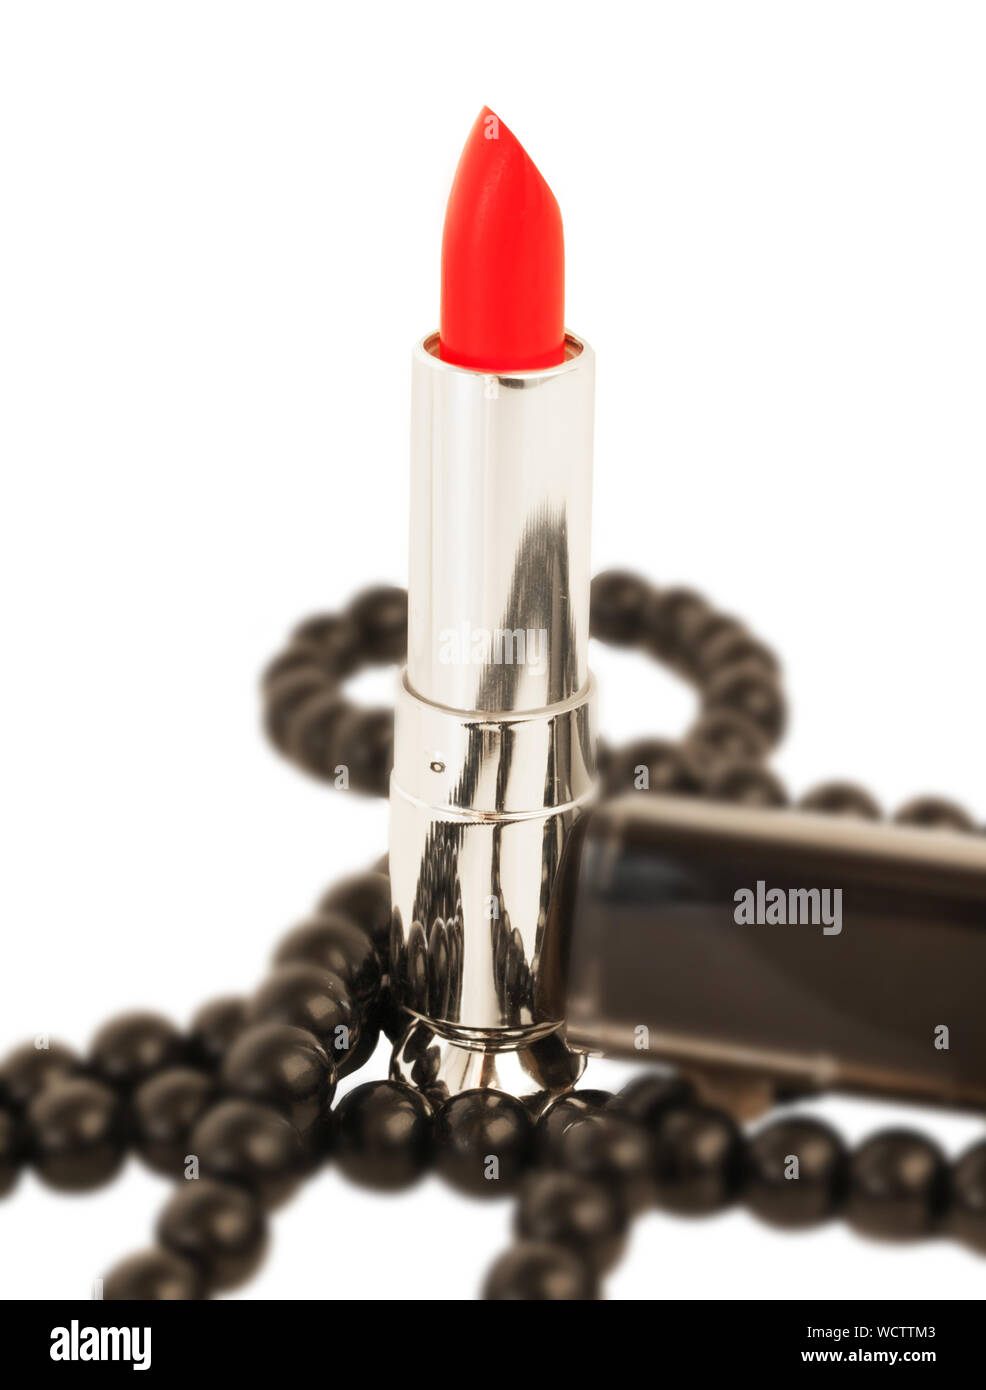 Red Lipstick Against White Background Stock Photo